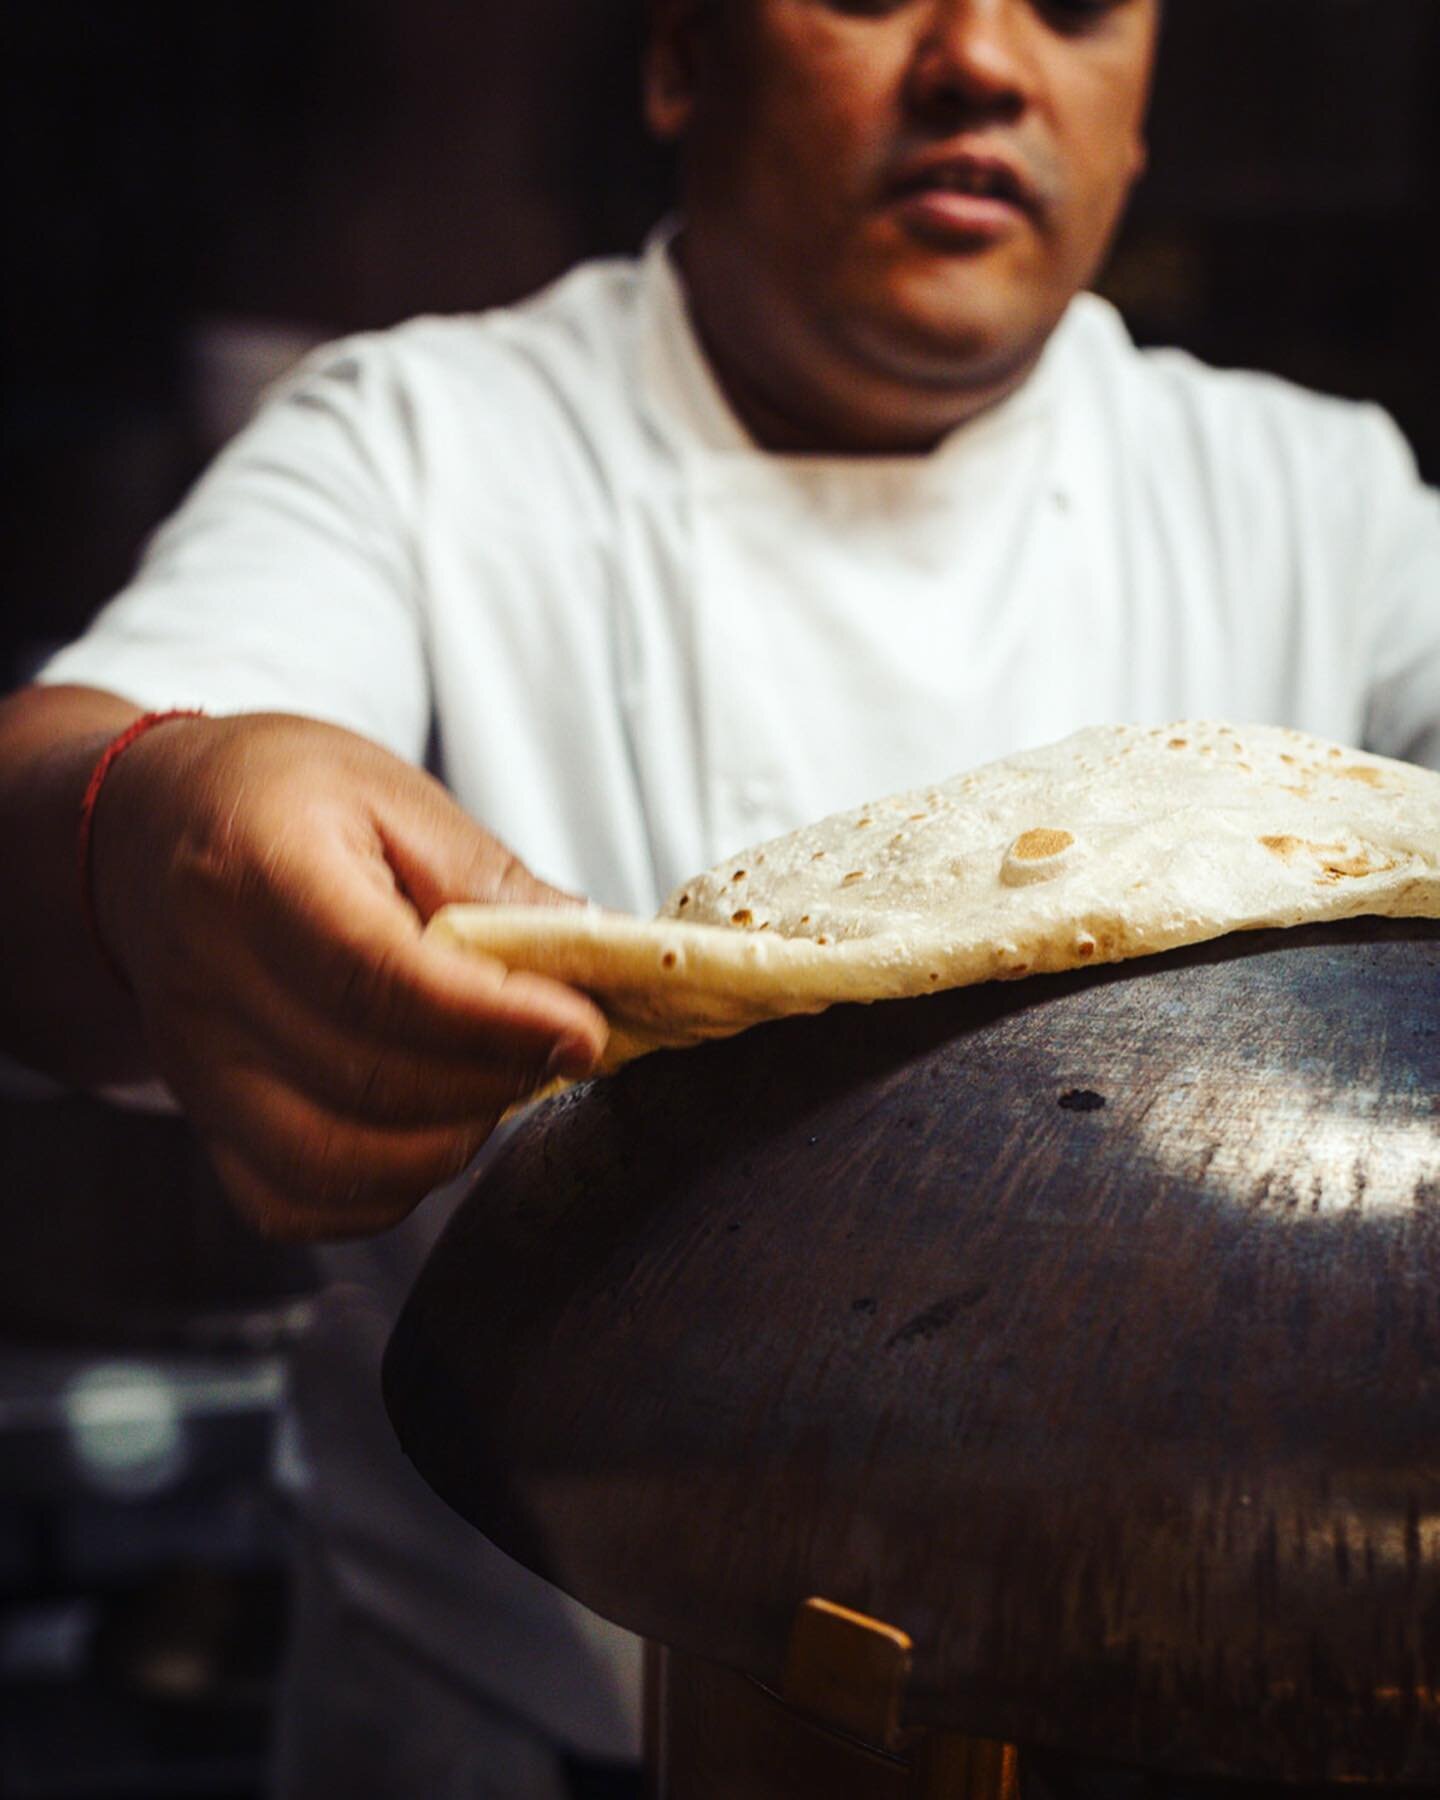 Cooking the Roomali Roti on an inverted Tawa @copperchimney_uk⁠⠀
⁠⠀
Menu and interiors for the amazing @copperchimney_uk opening last year.⁠⠀
⁠⠀
.⁠⠀
.⁠⠀
.⁠⠀
.⁠⠀
.⁠⠀
#londonfood #london #thisislondon #Foodies #londoneats #londonrestaurants #foodphotog